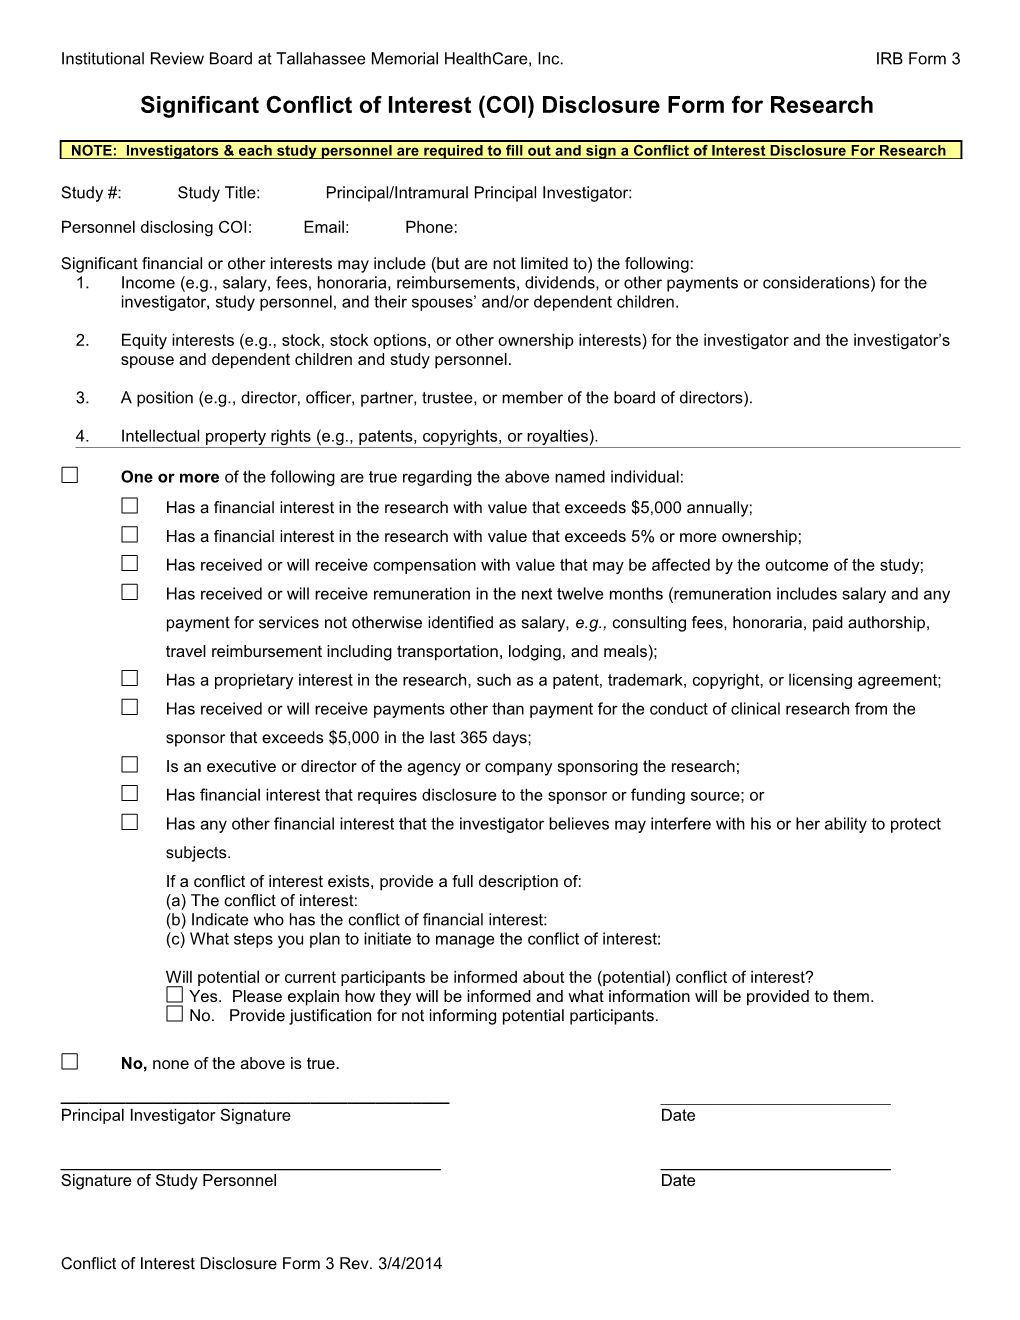 Form 3 TMH Conflict of Interest Disclosure Form for Research